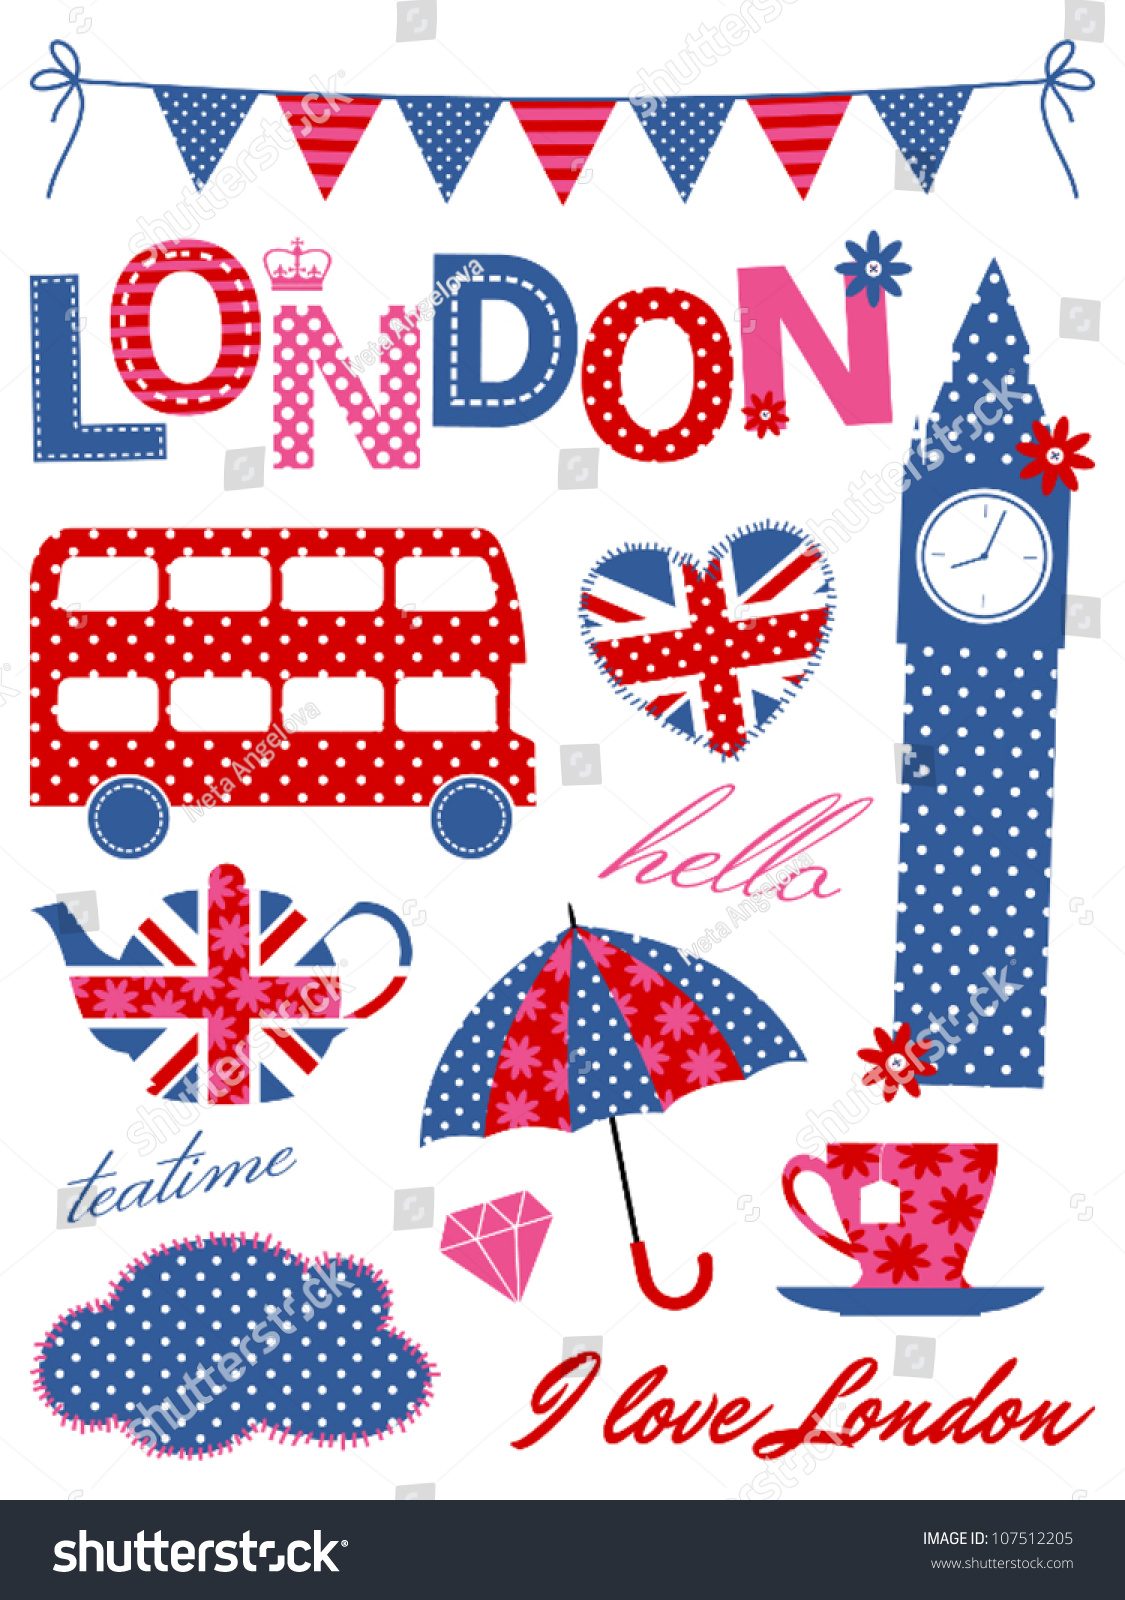 SVG of London scrapbook elements in blue, red and pink. svg